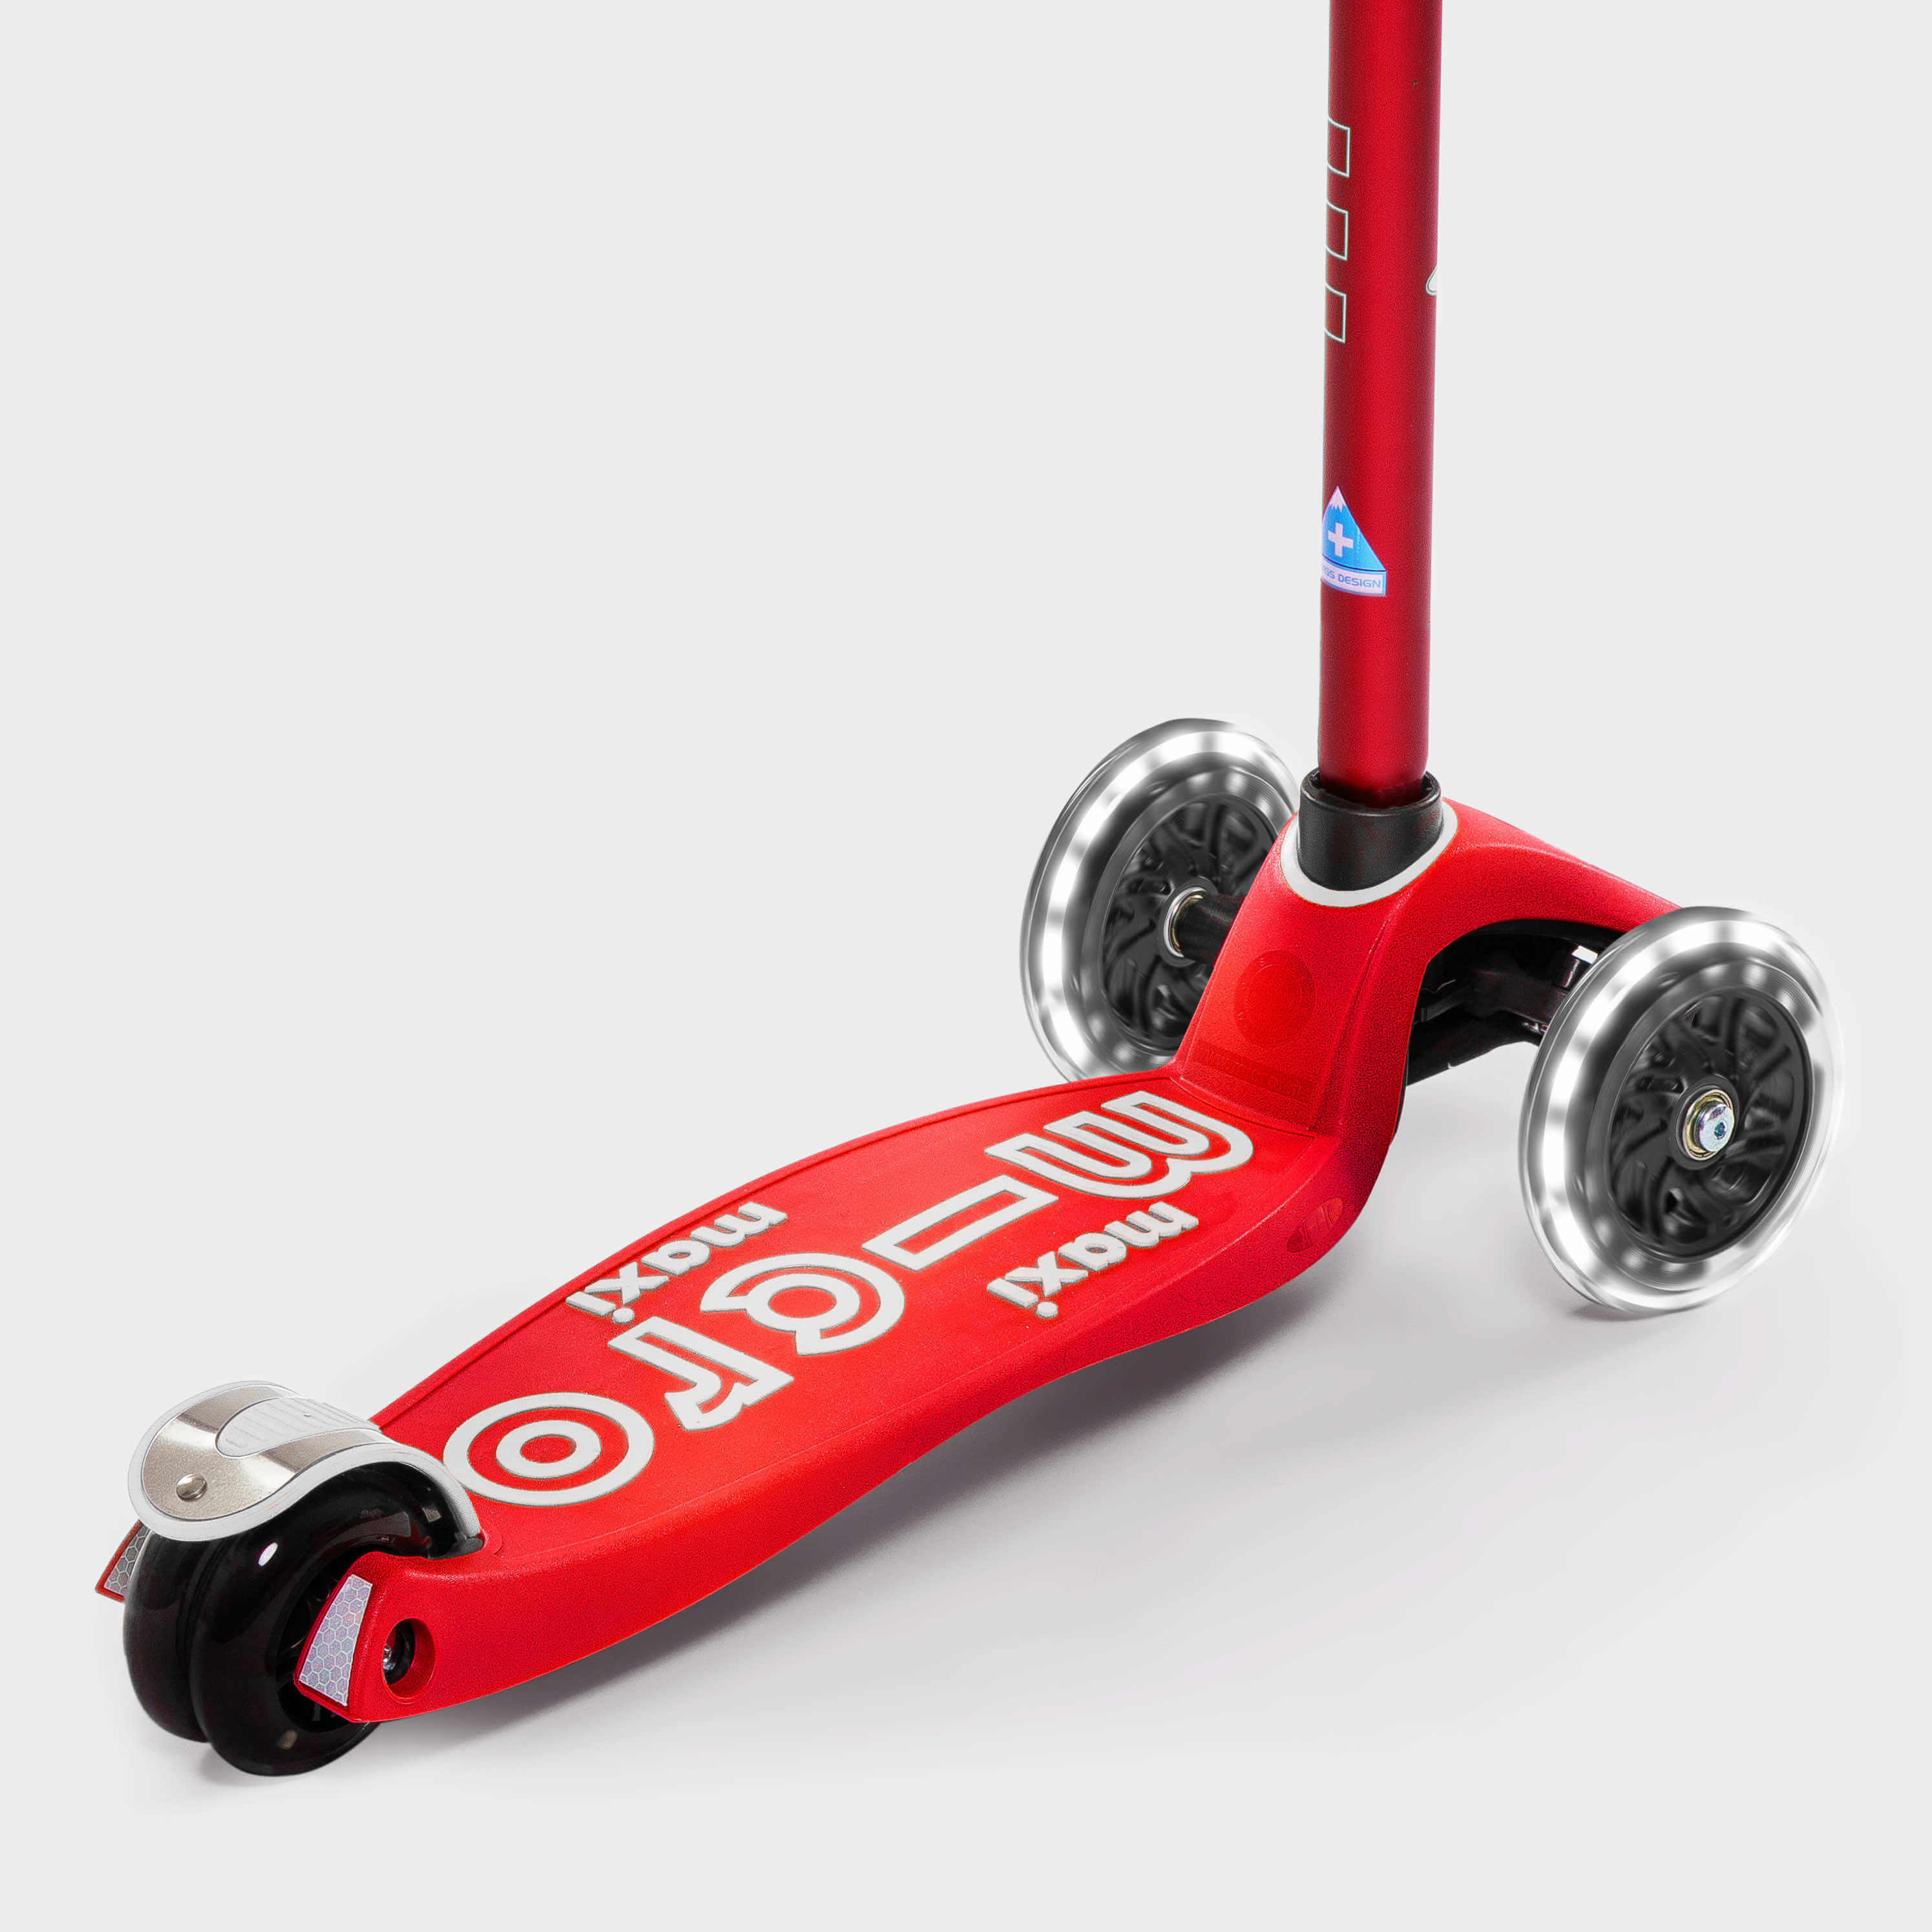 Maxi Scooter - Light up Wheels: Red 5/7